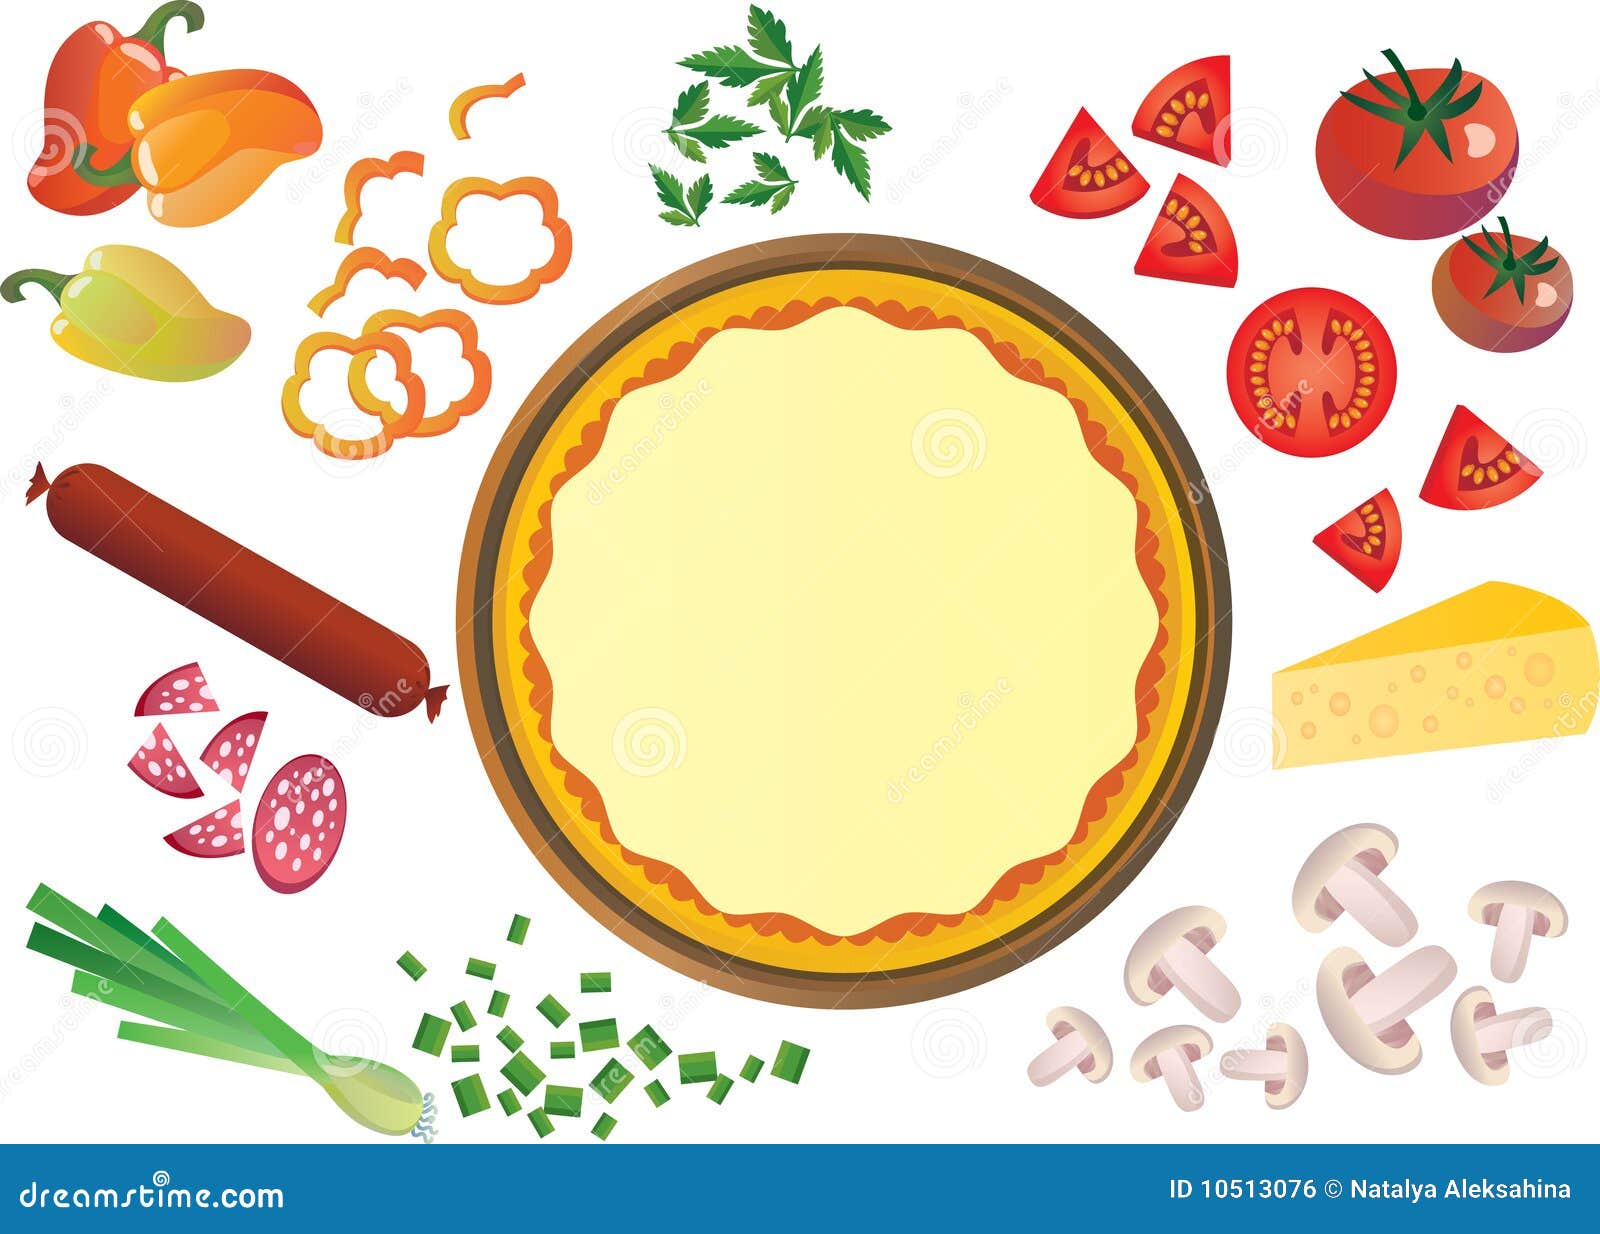 pizza ingredients clipart - photo #3